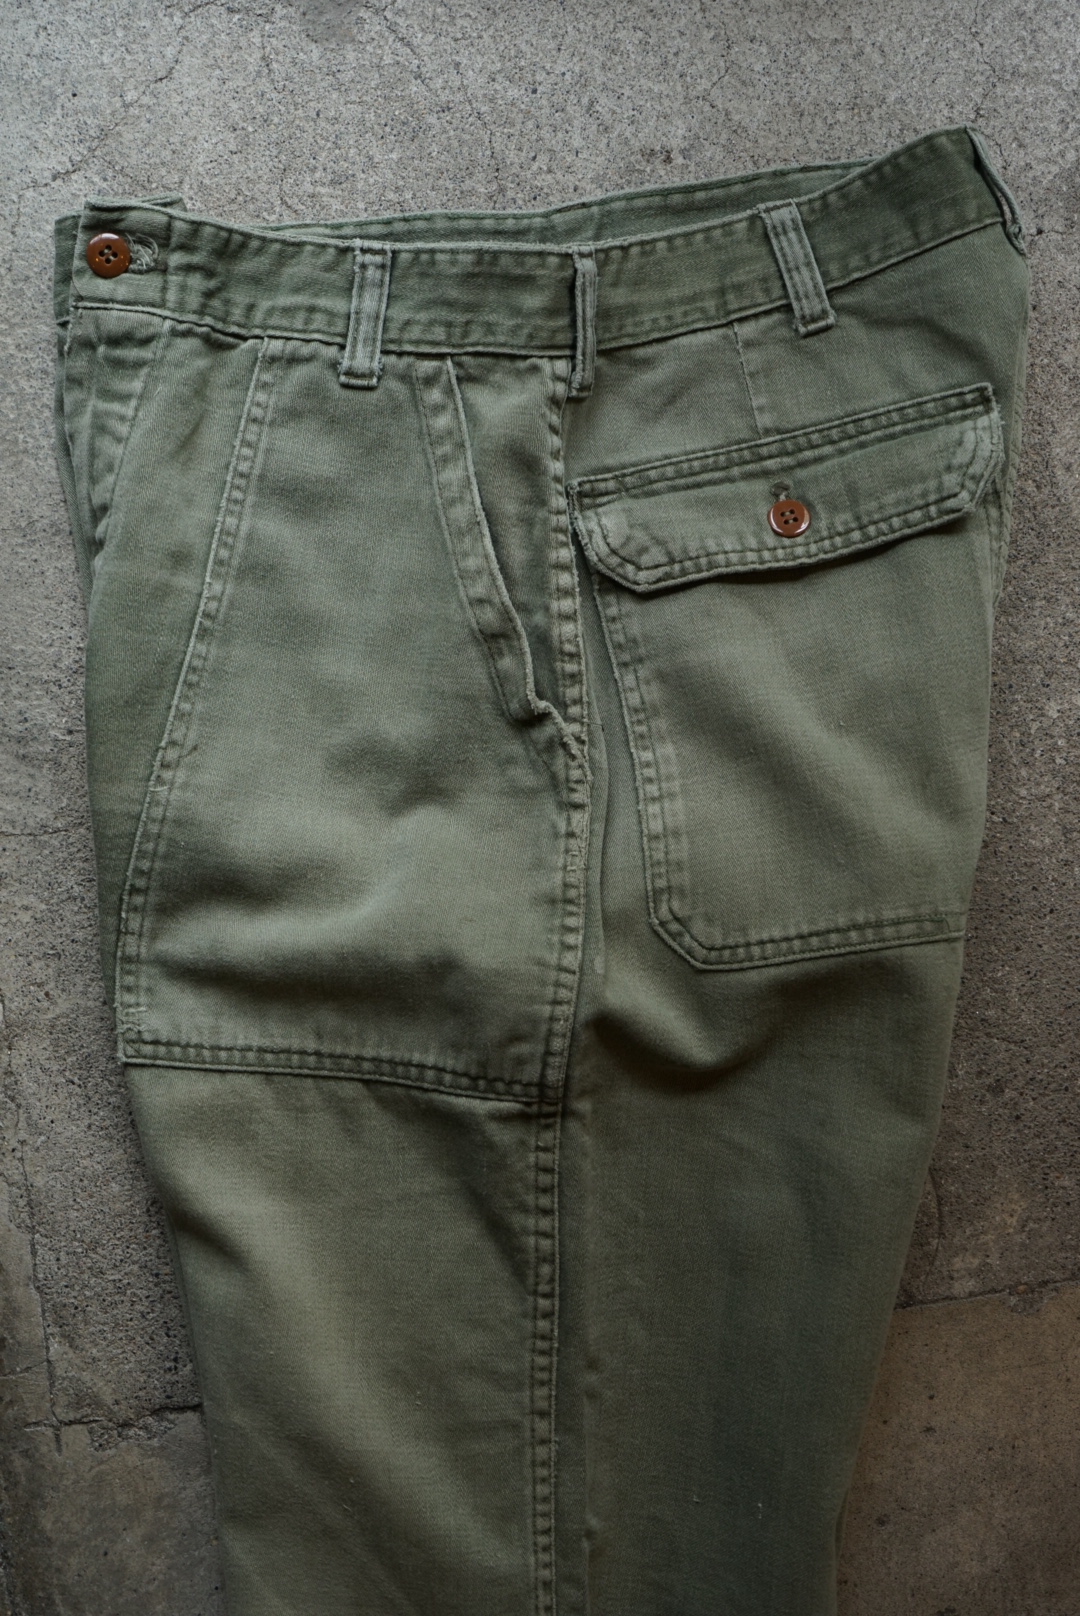 US ARMY BAKER PANTS REPAIRED 08